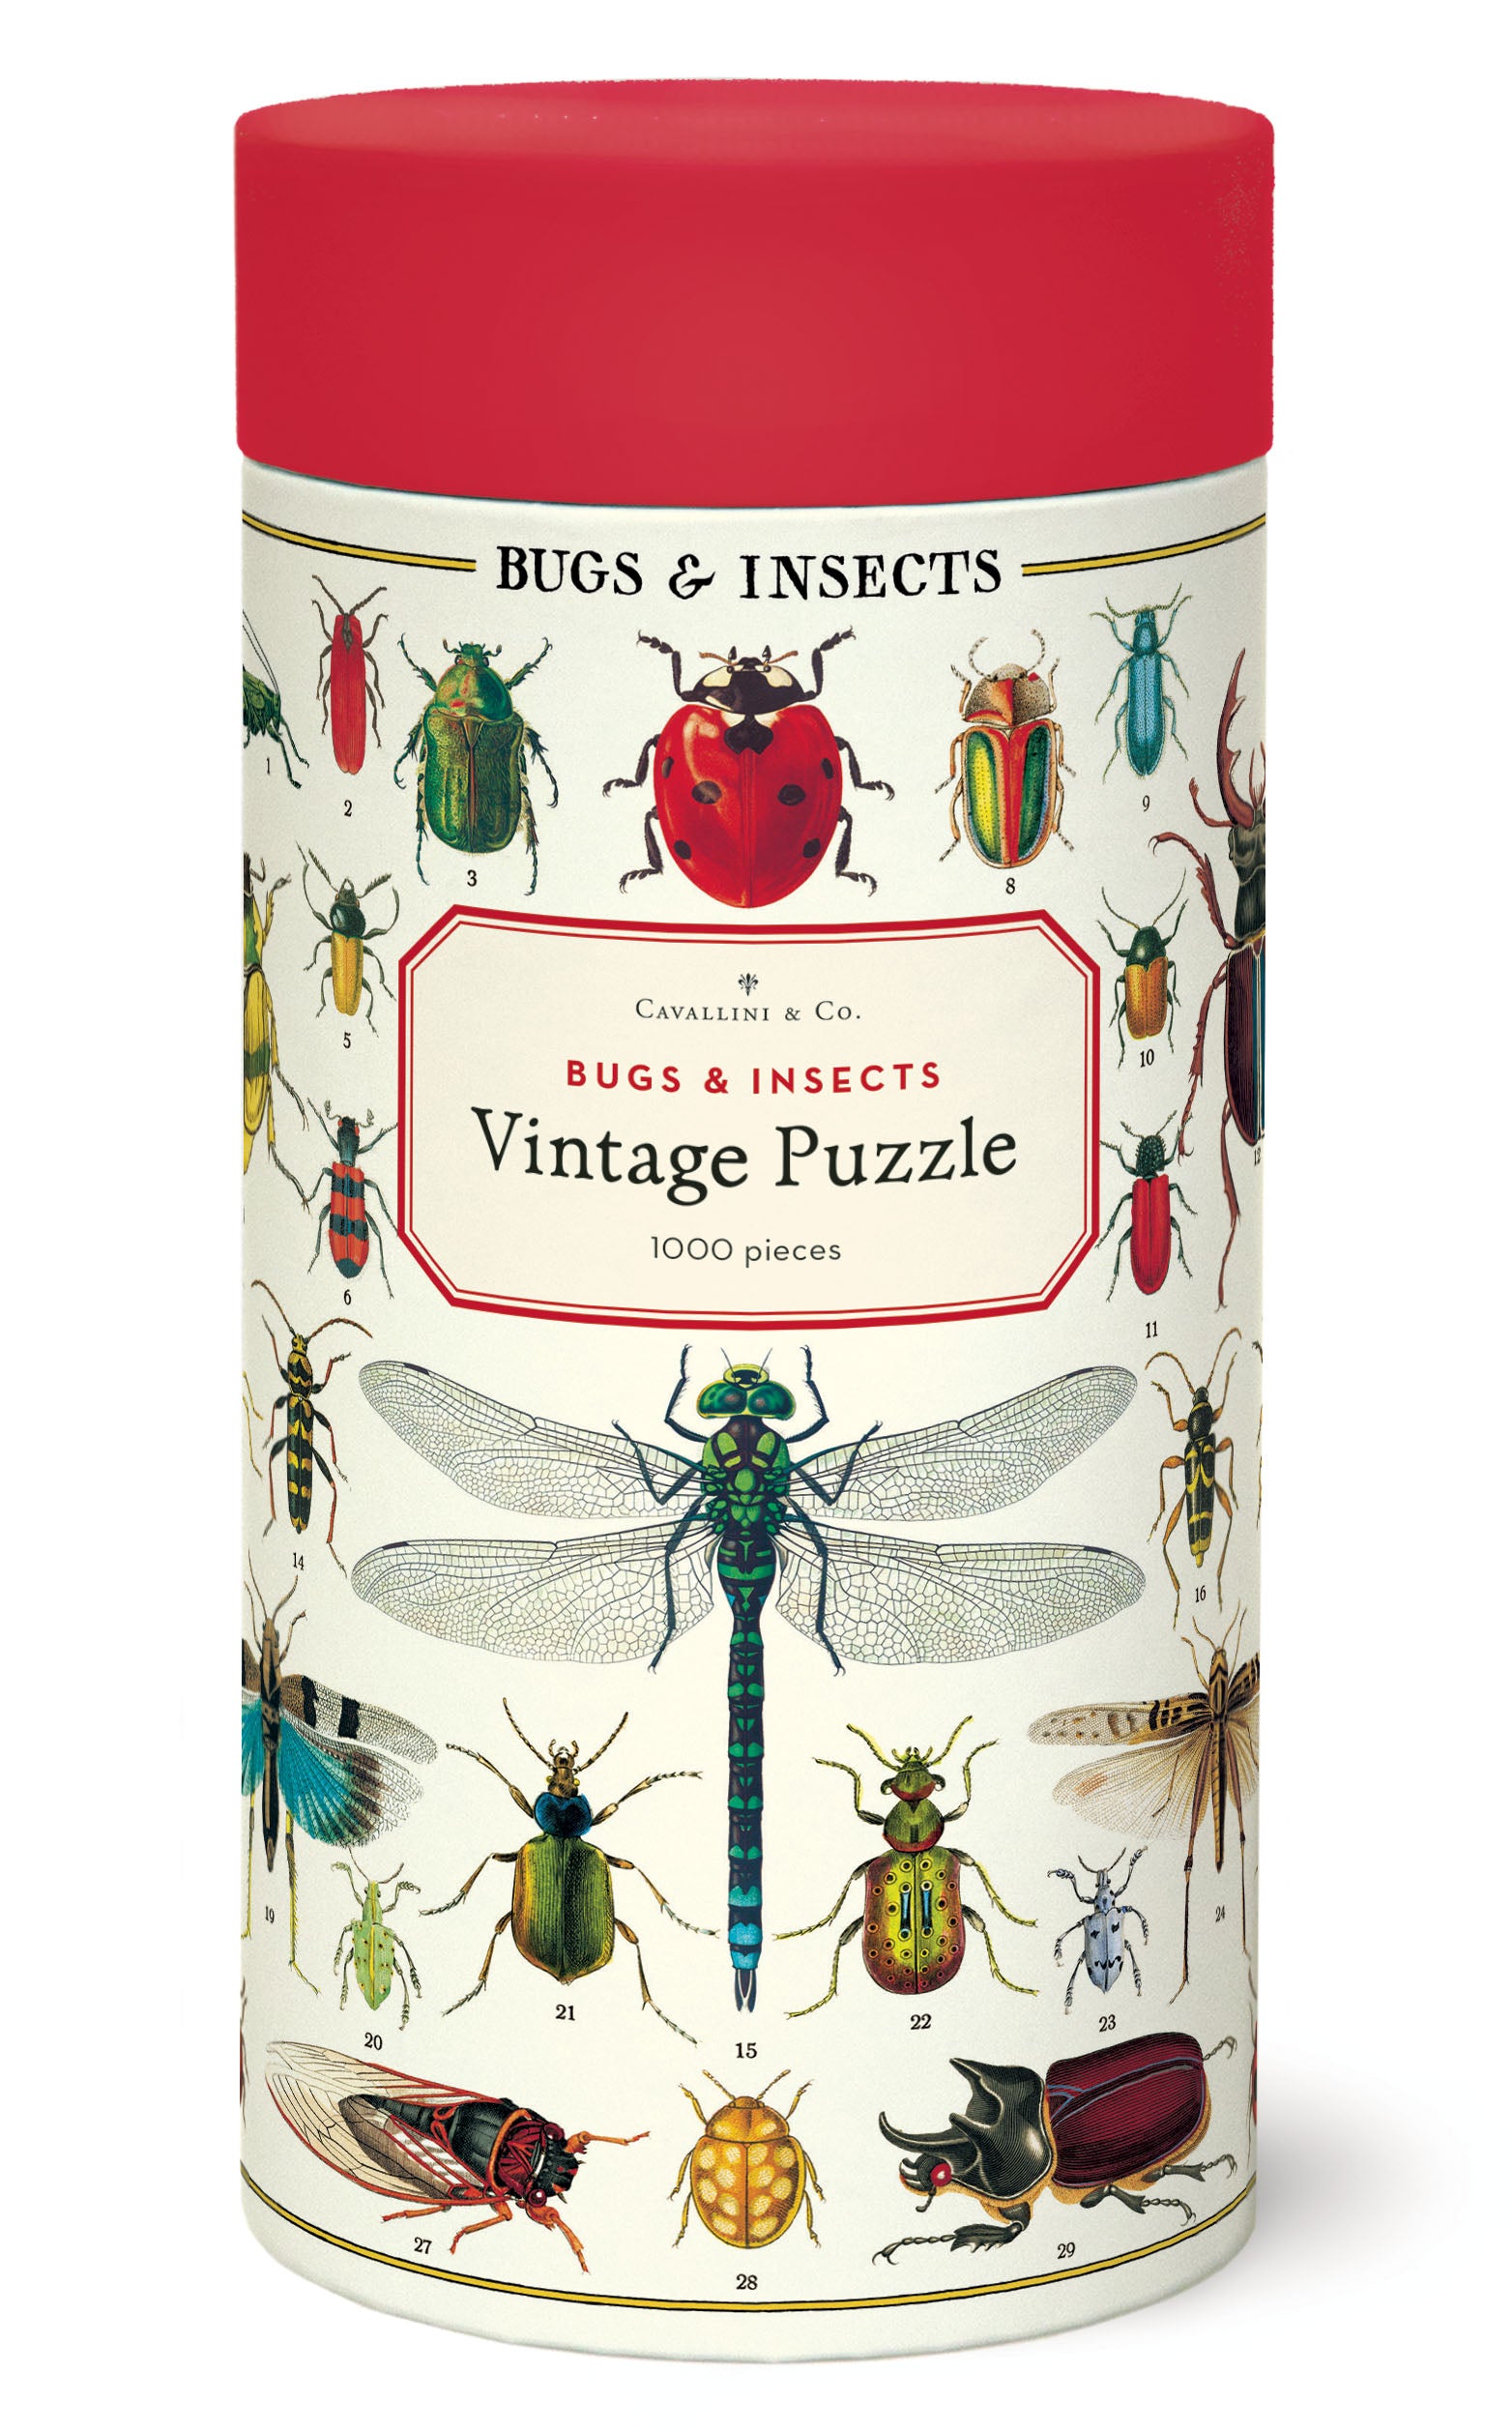 Image of Cavallini & Co. Bugs & Insects 1000 Piece Puzzle package.